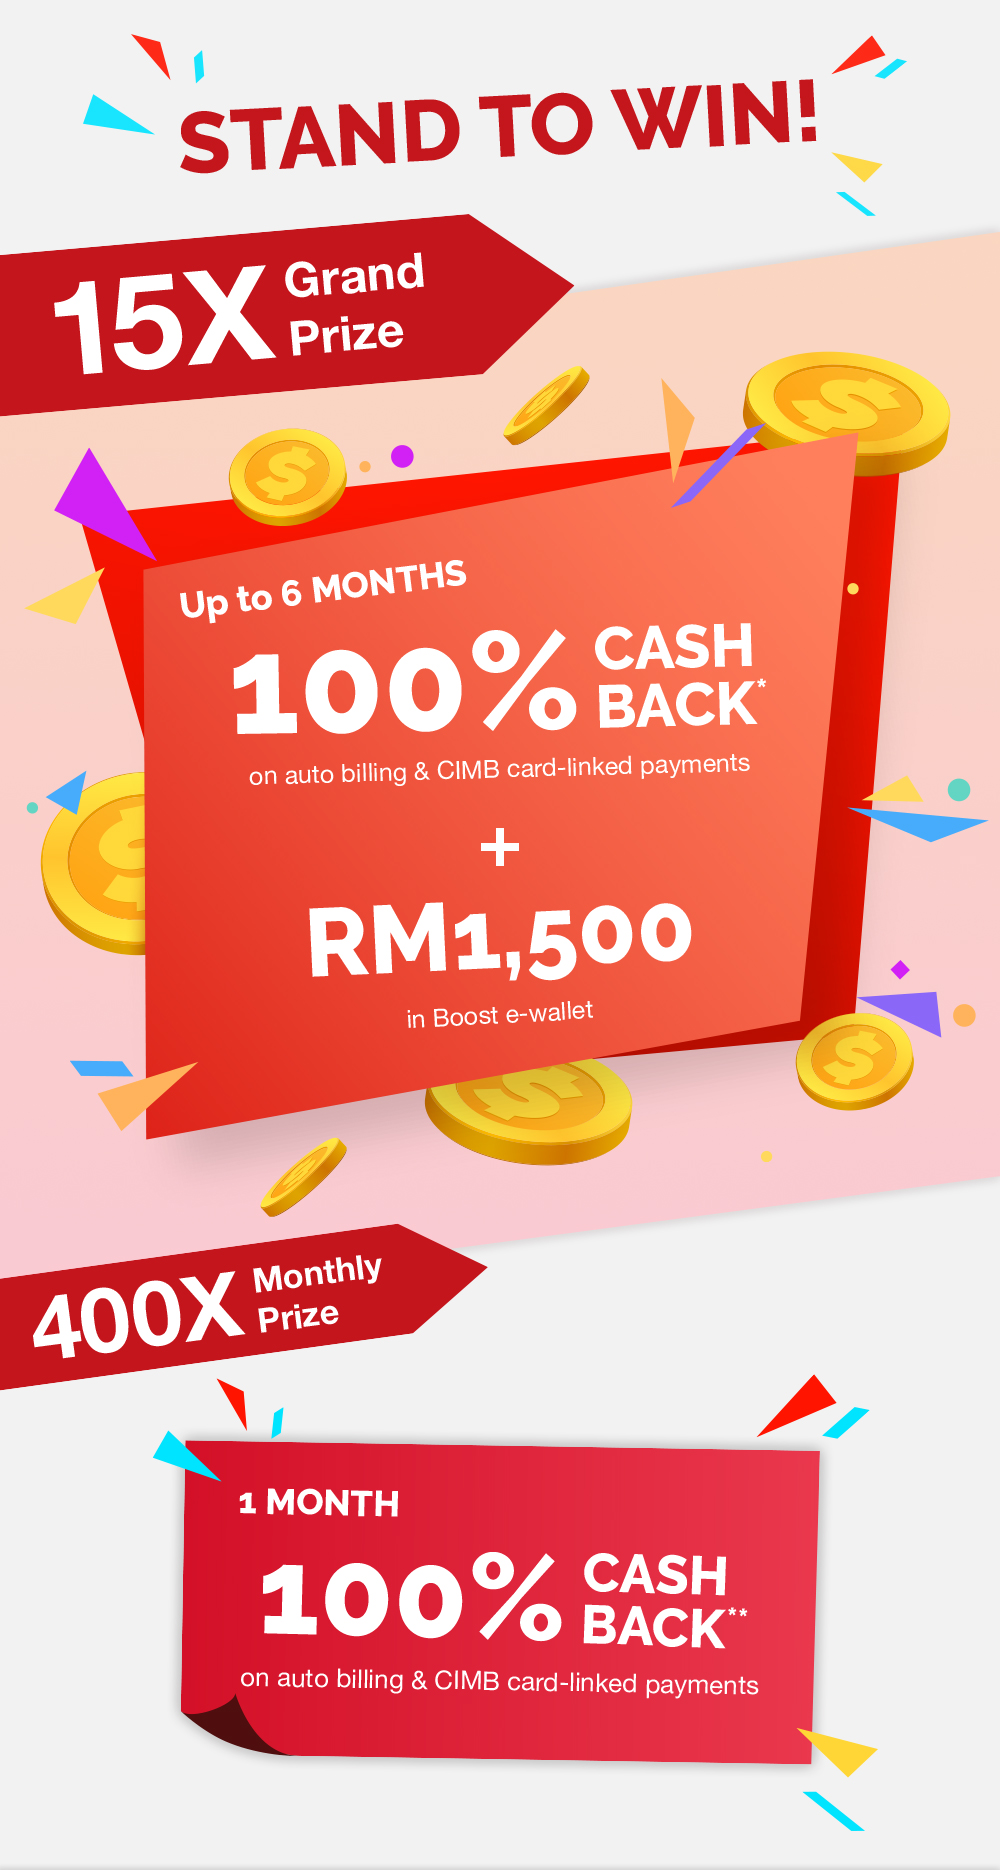 cimb-cash-rebate-platinum-10-best-credit-card-malaysia-review-must-have-auntiereviews-kad